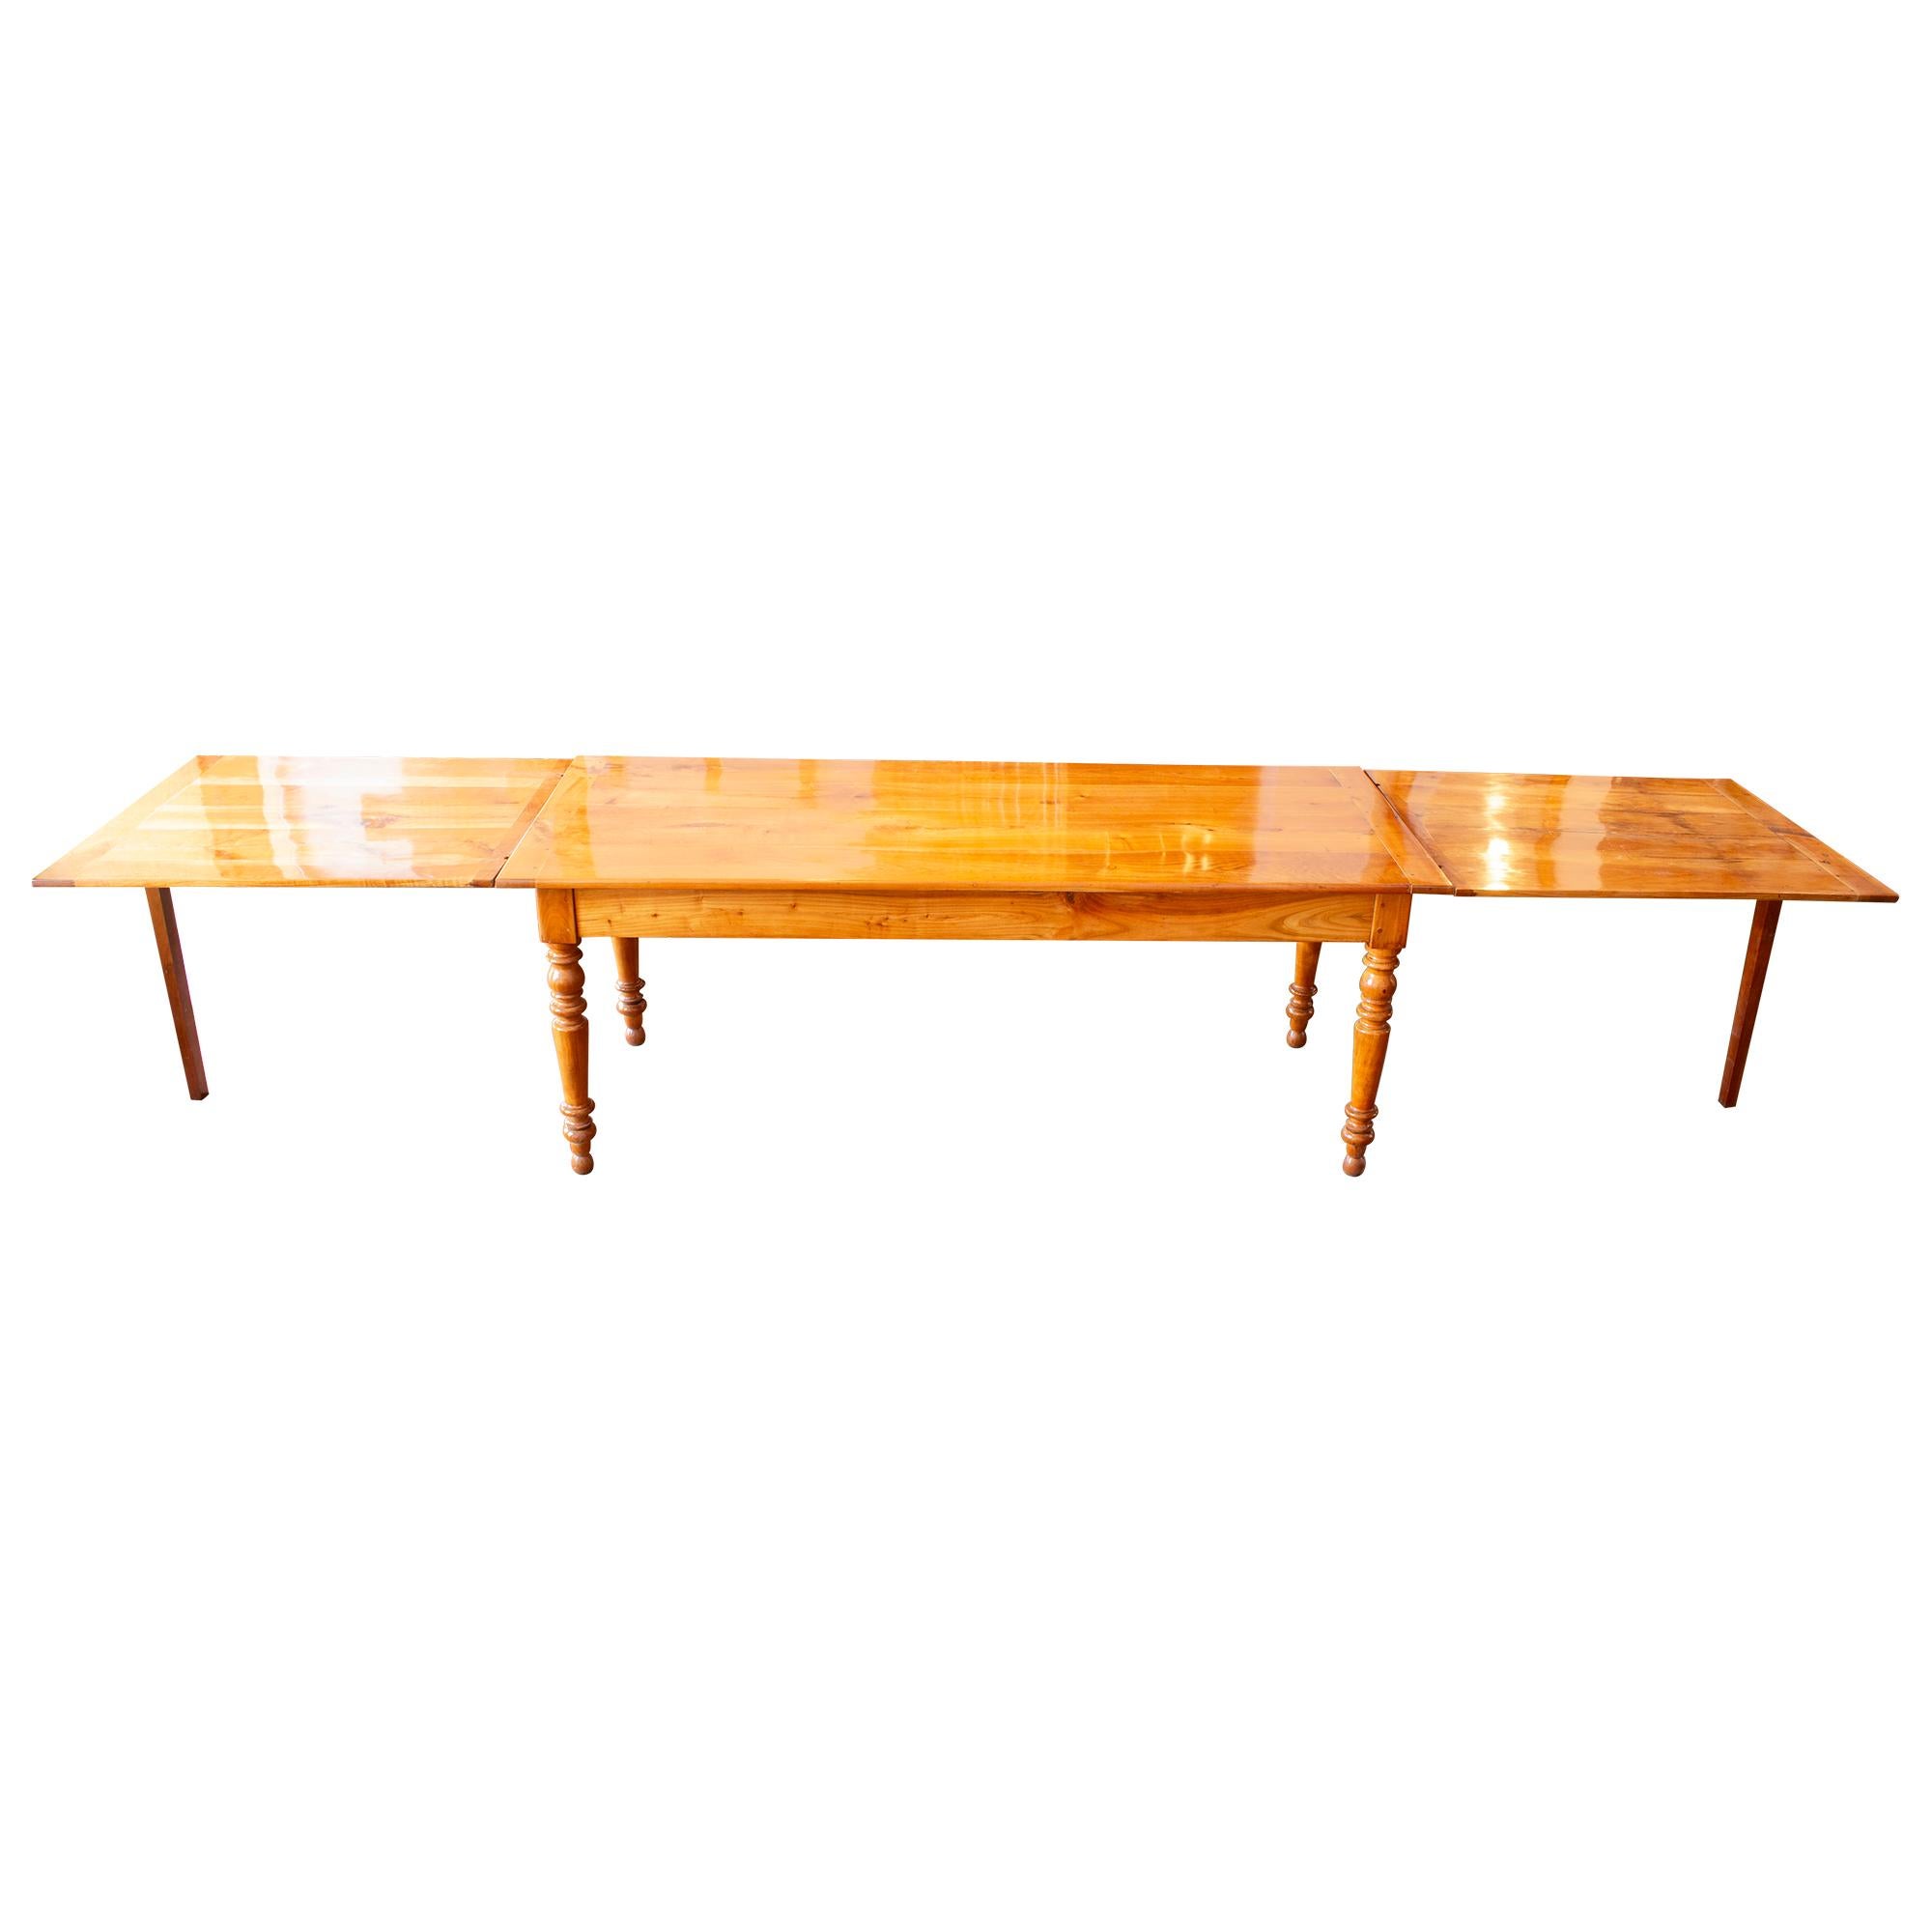 French 19th Century Country House Biedermeier Cherrywood Extendable Table For Sale